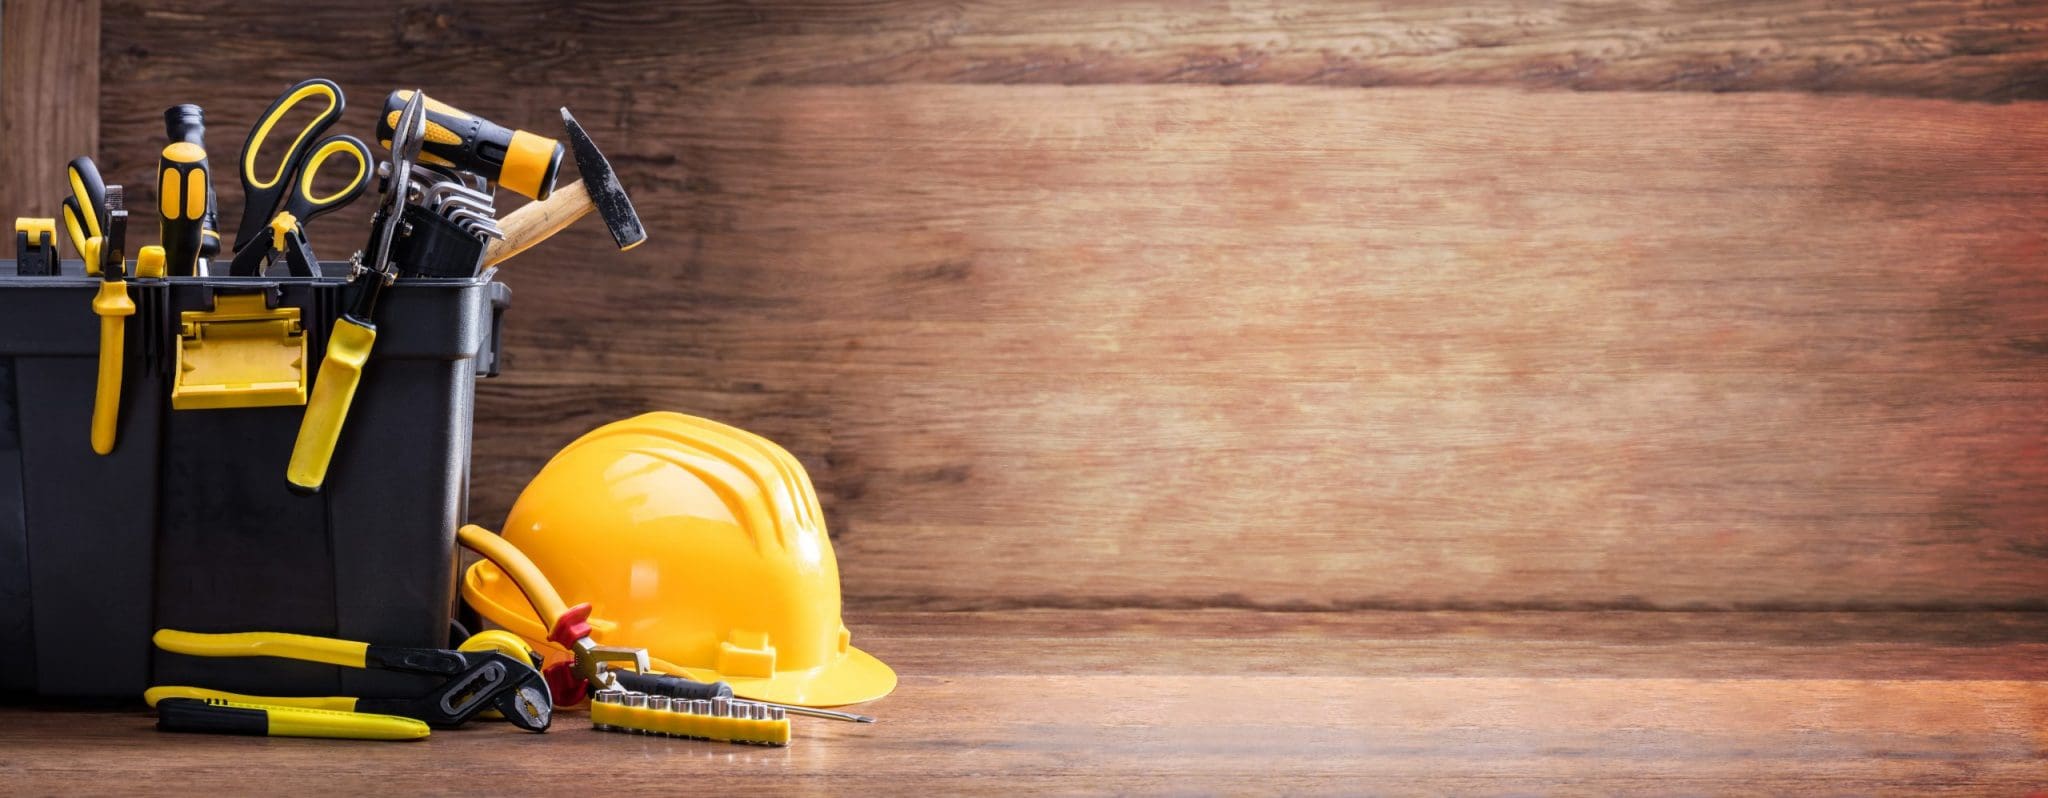 Technology for Construction Safety